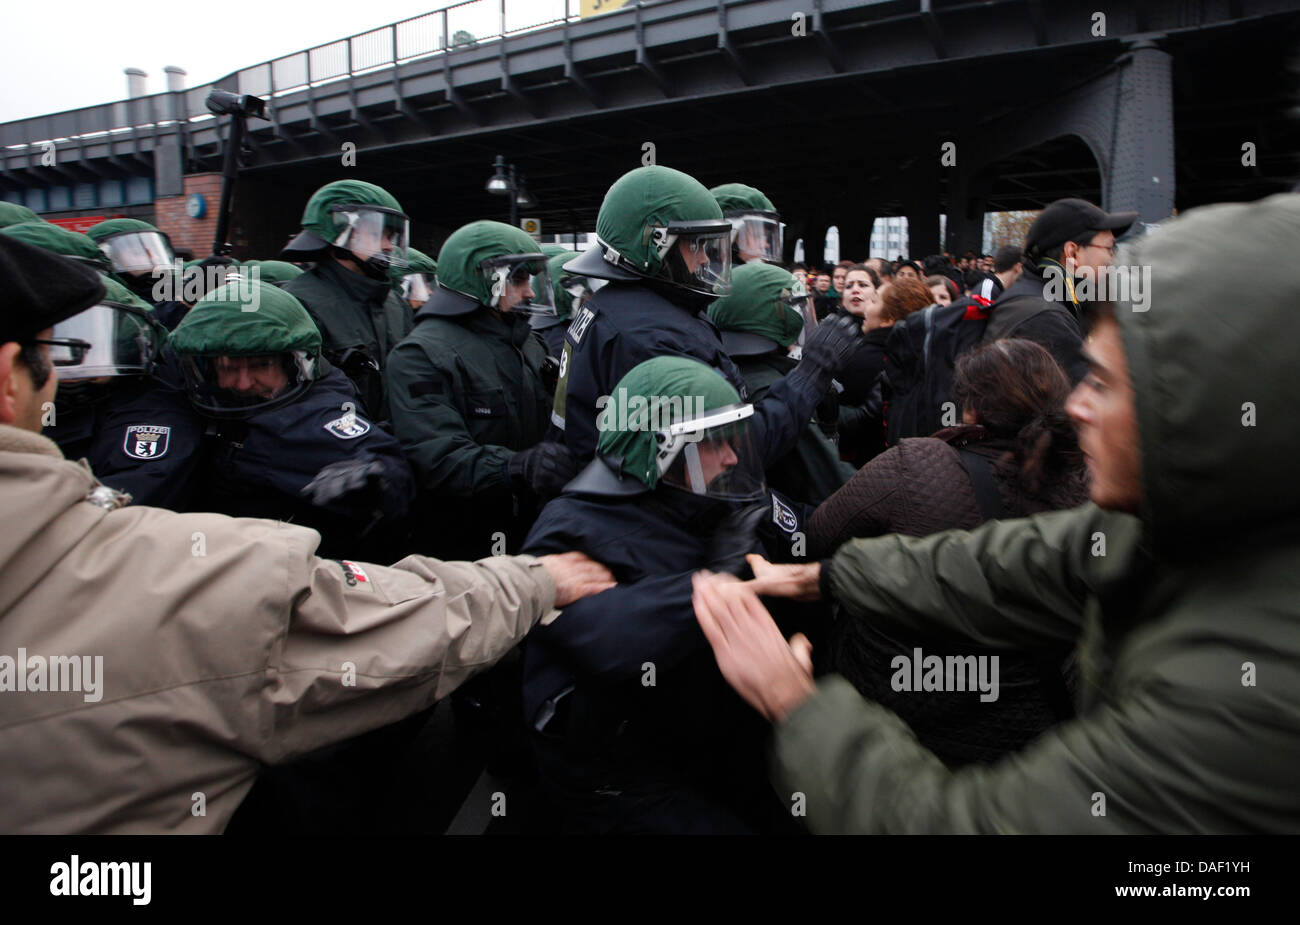 Demonstrators clash with police officers during a demonstration against fascism and police state in Berlin, Germany, 26 November 2011. Several hundred people demonstrated in the streets and criticised the yet unclear relationship between constitution protection and members of the National Socialist Underground (NSU). After a Kurdish demonstration was stopped on the same day, severa Stock Photo